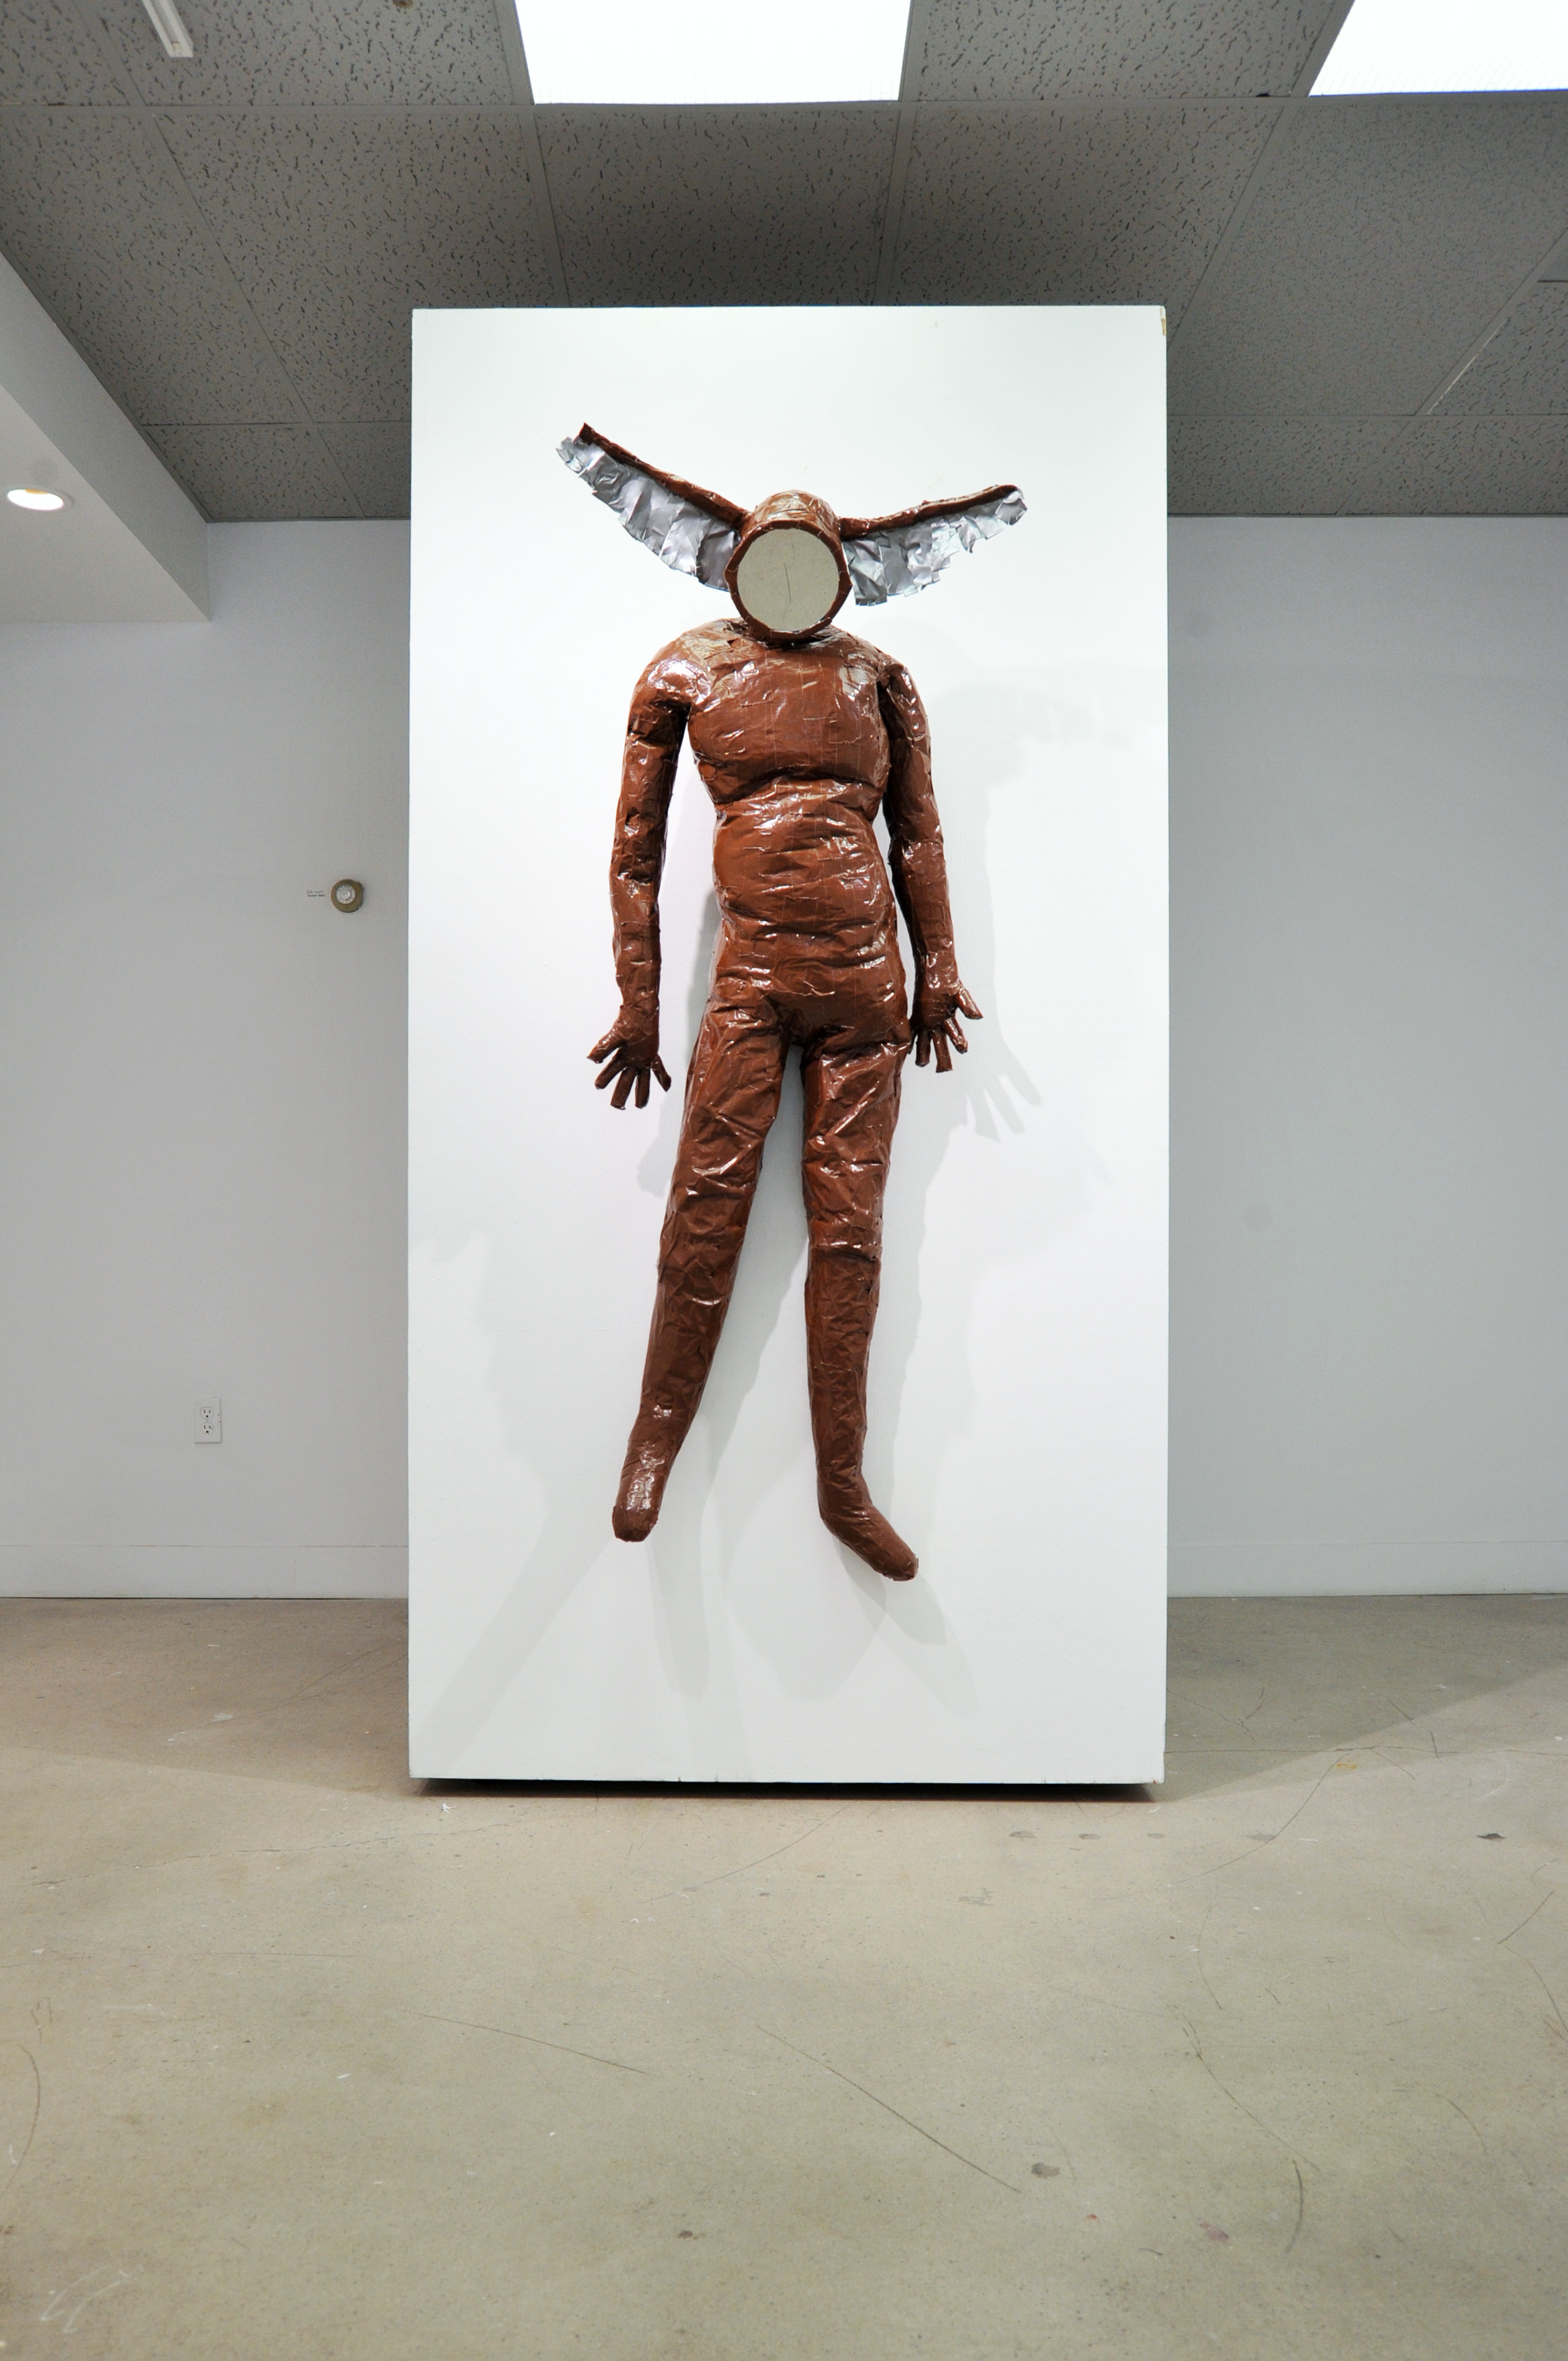 A humanoid sculpture with a blank face and large ears protruding from the sides of its head